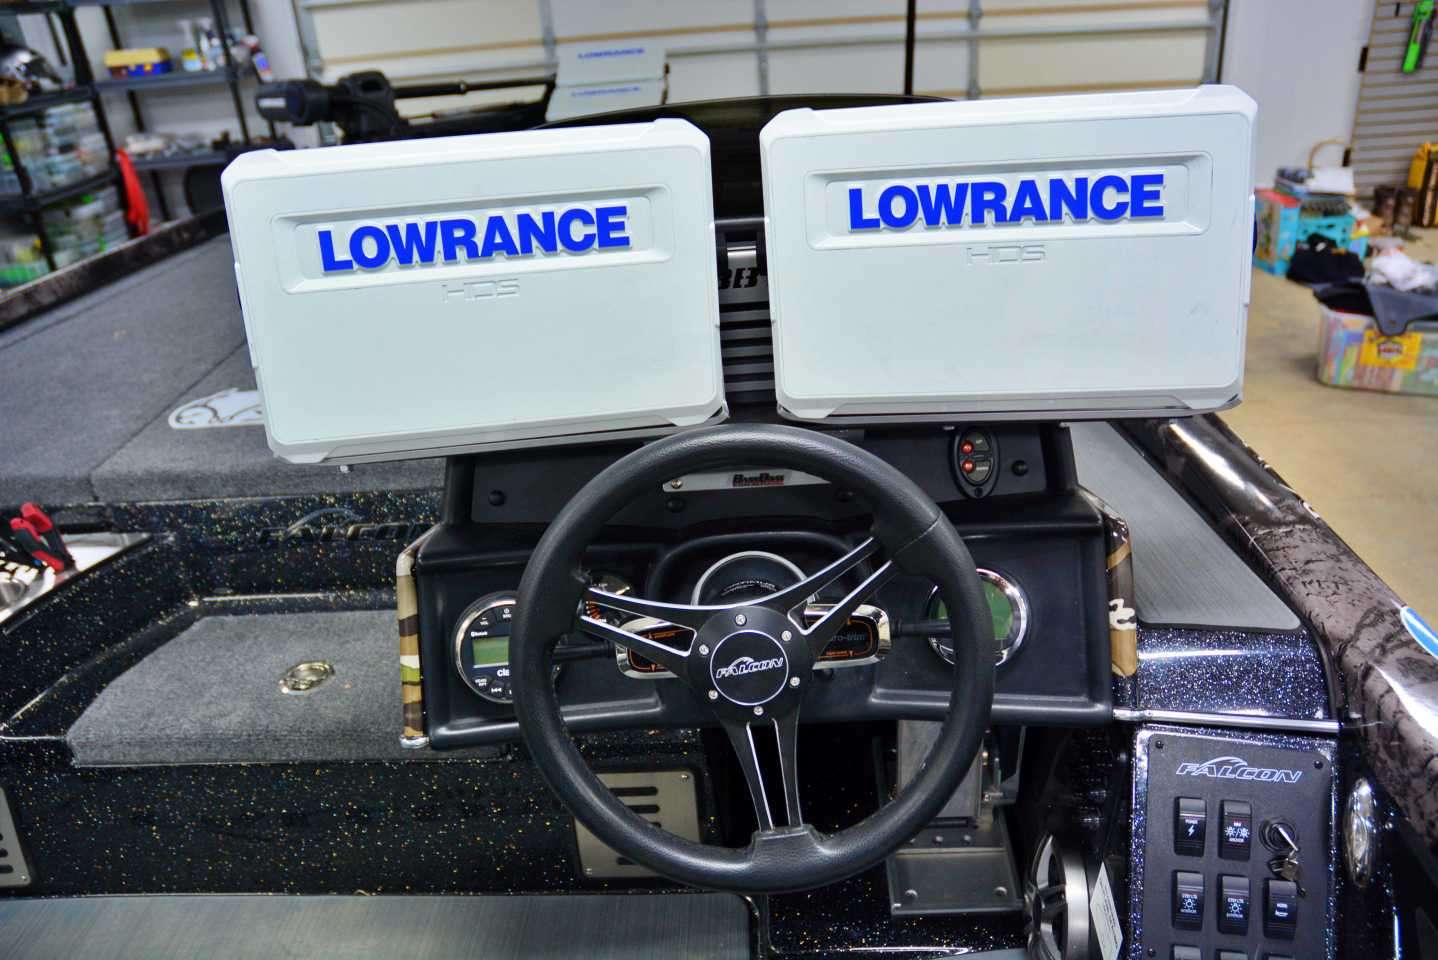 At the console are two more Lowrance HDS 12 units. 